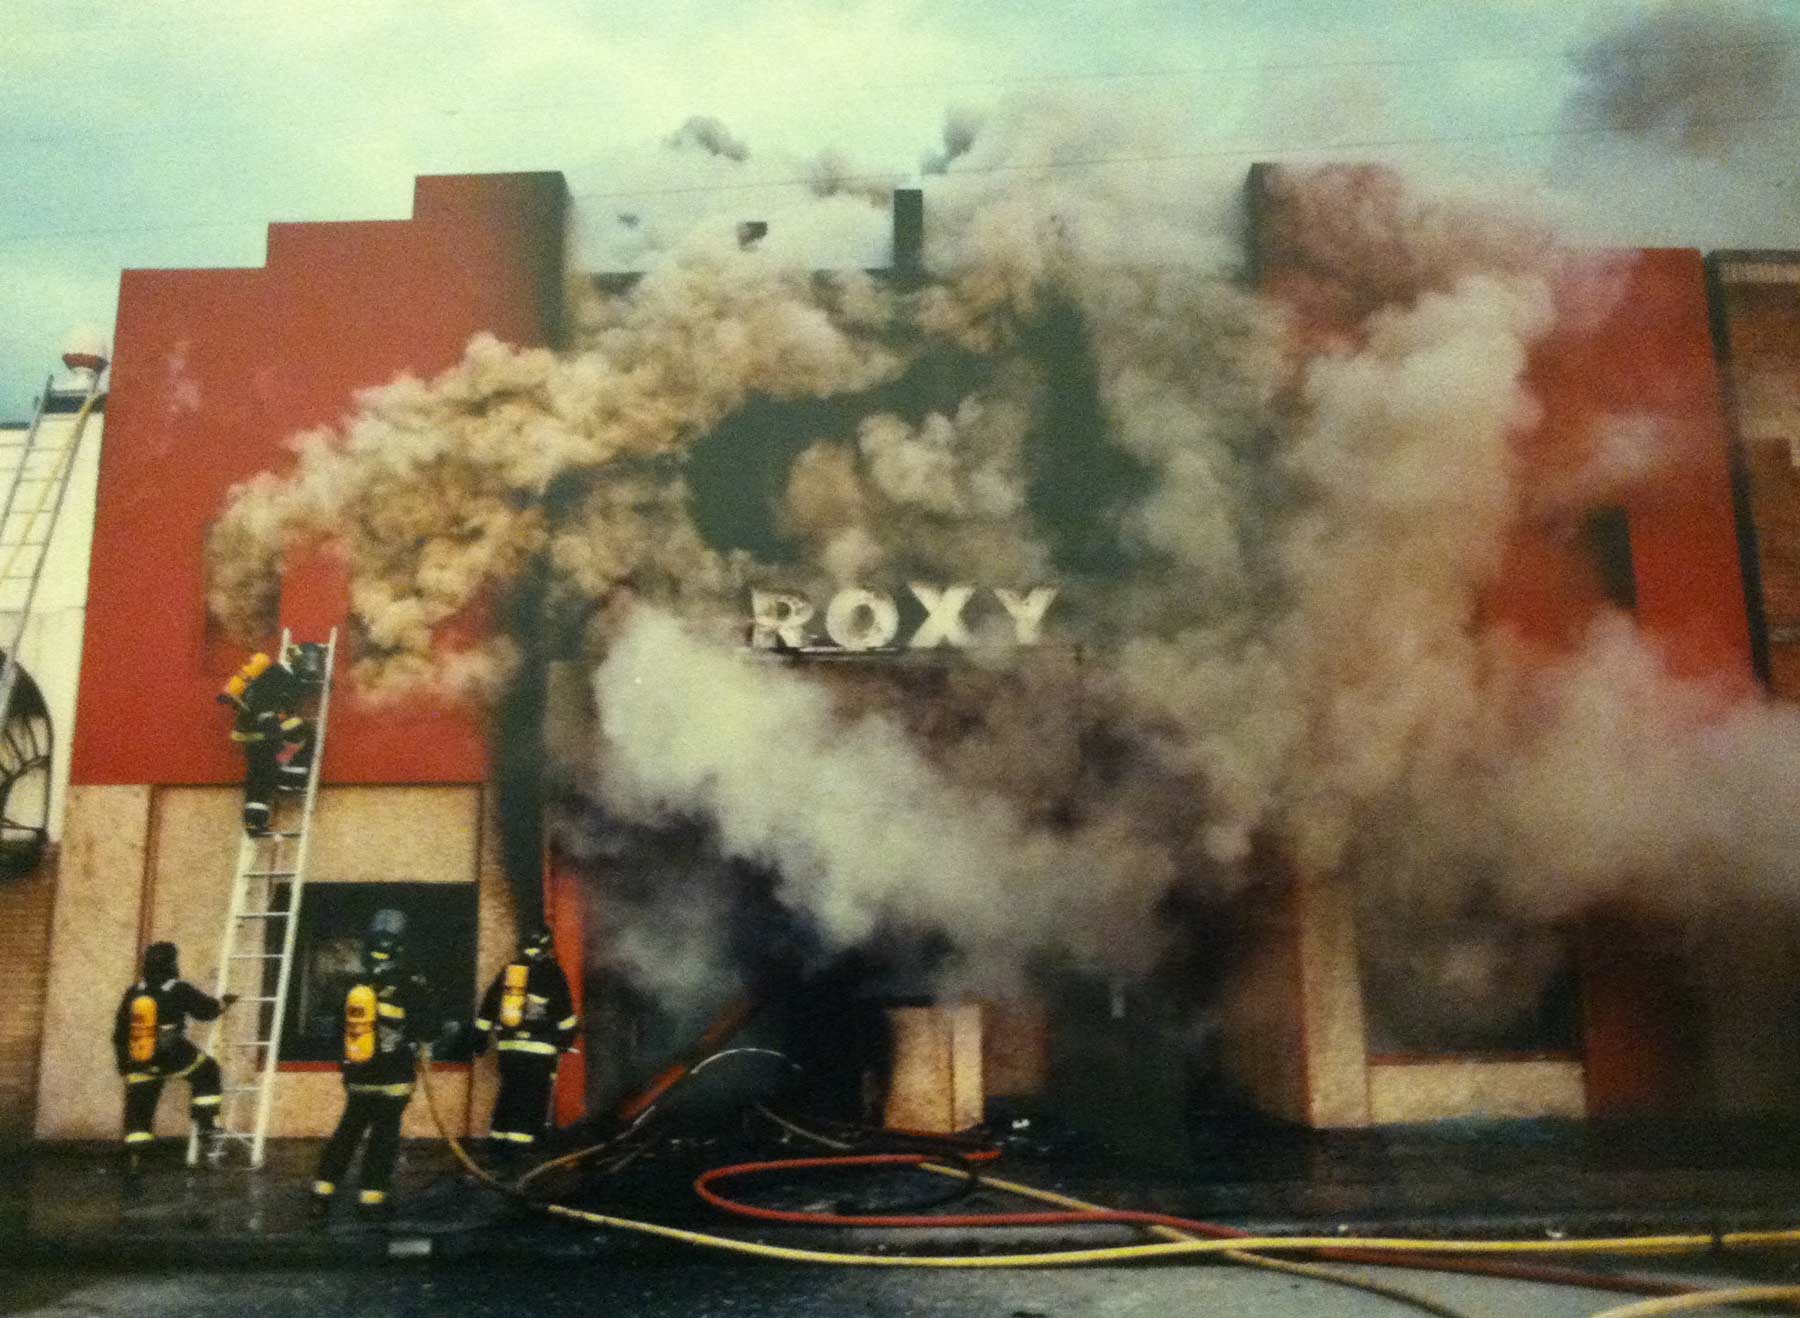 The Roxy Theater, on fire, 1994